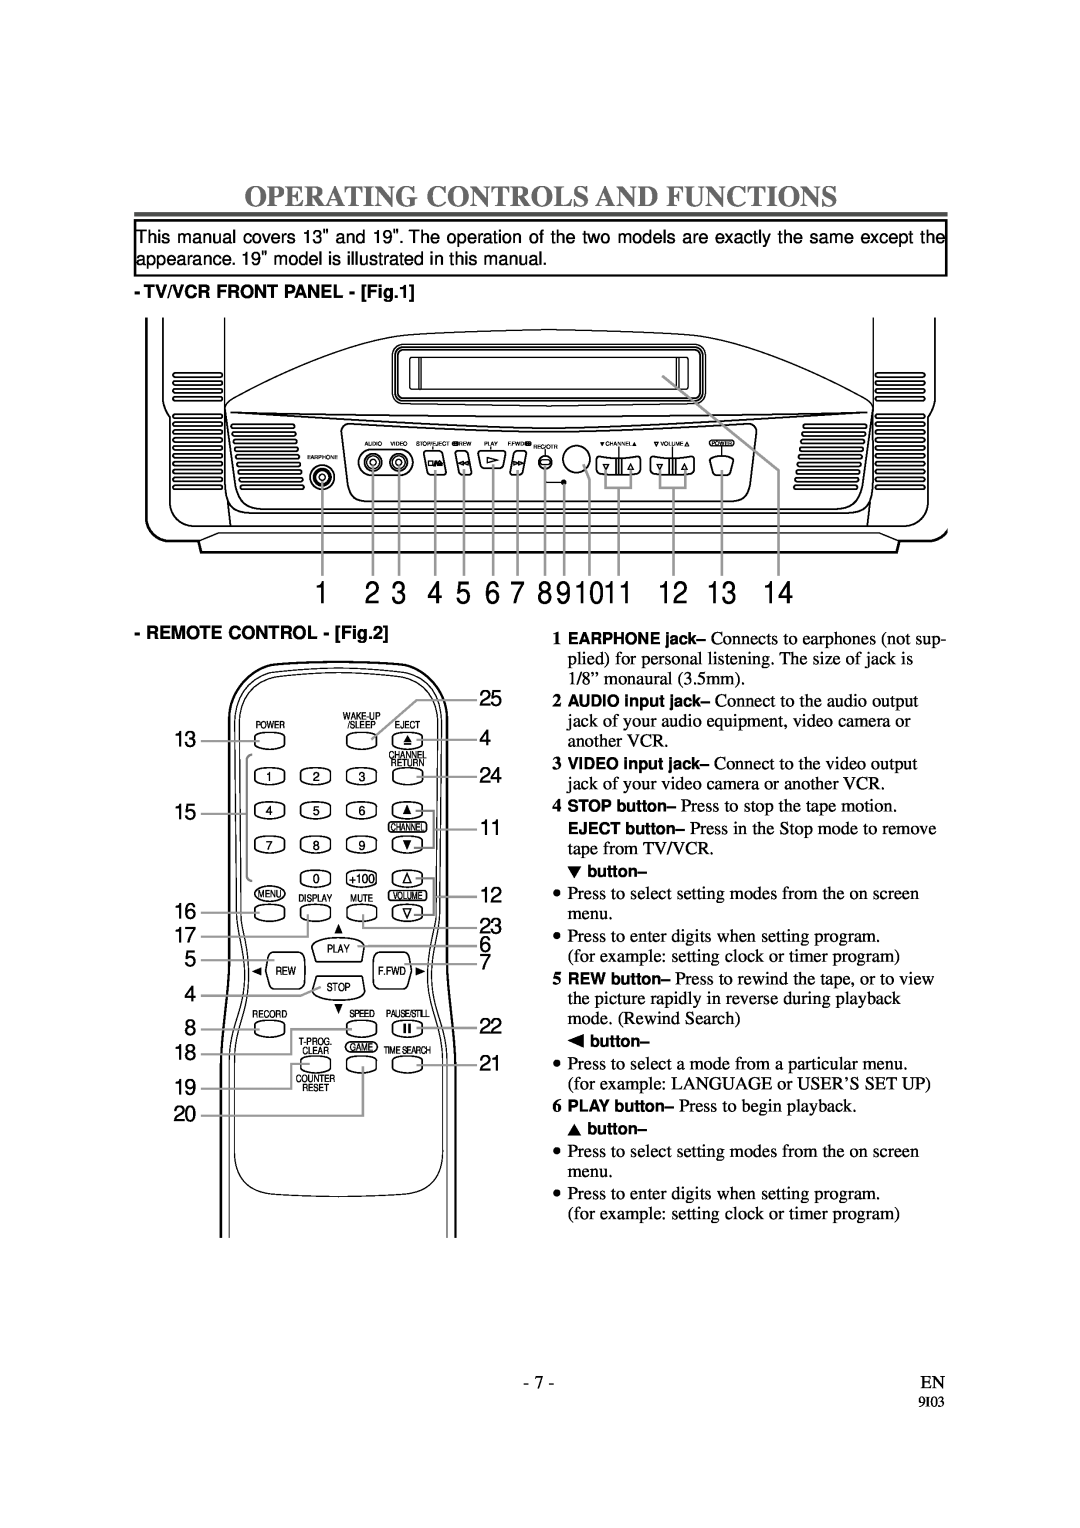 Emerson EWC1901 owner manual 4 5 6 7 8, Operating Controls And Functions, Tv/Vcr Front Panel, Remote Control 